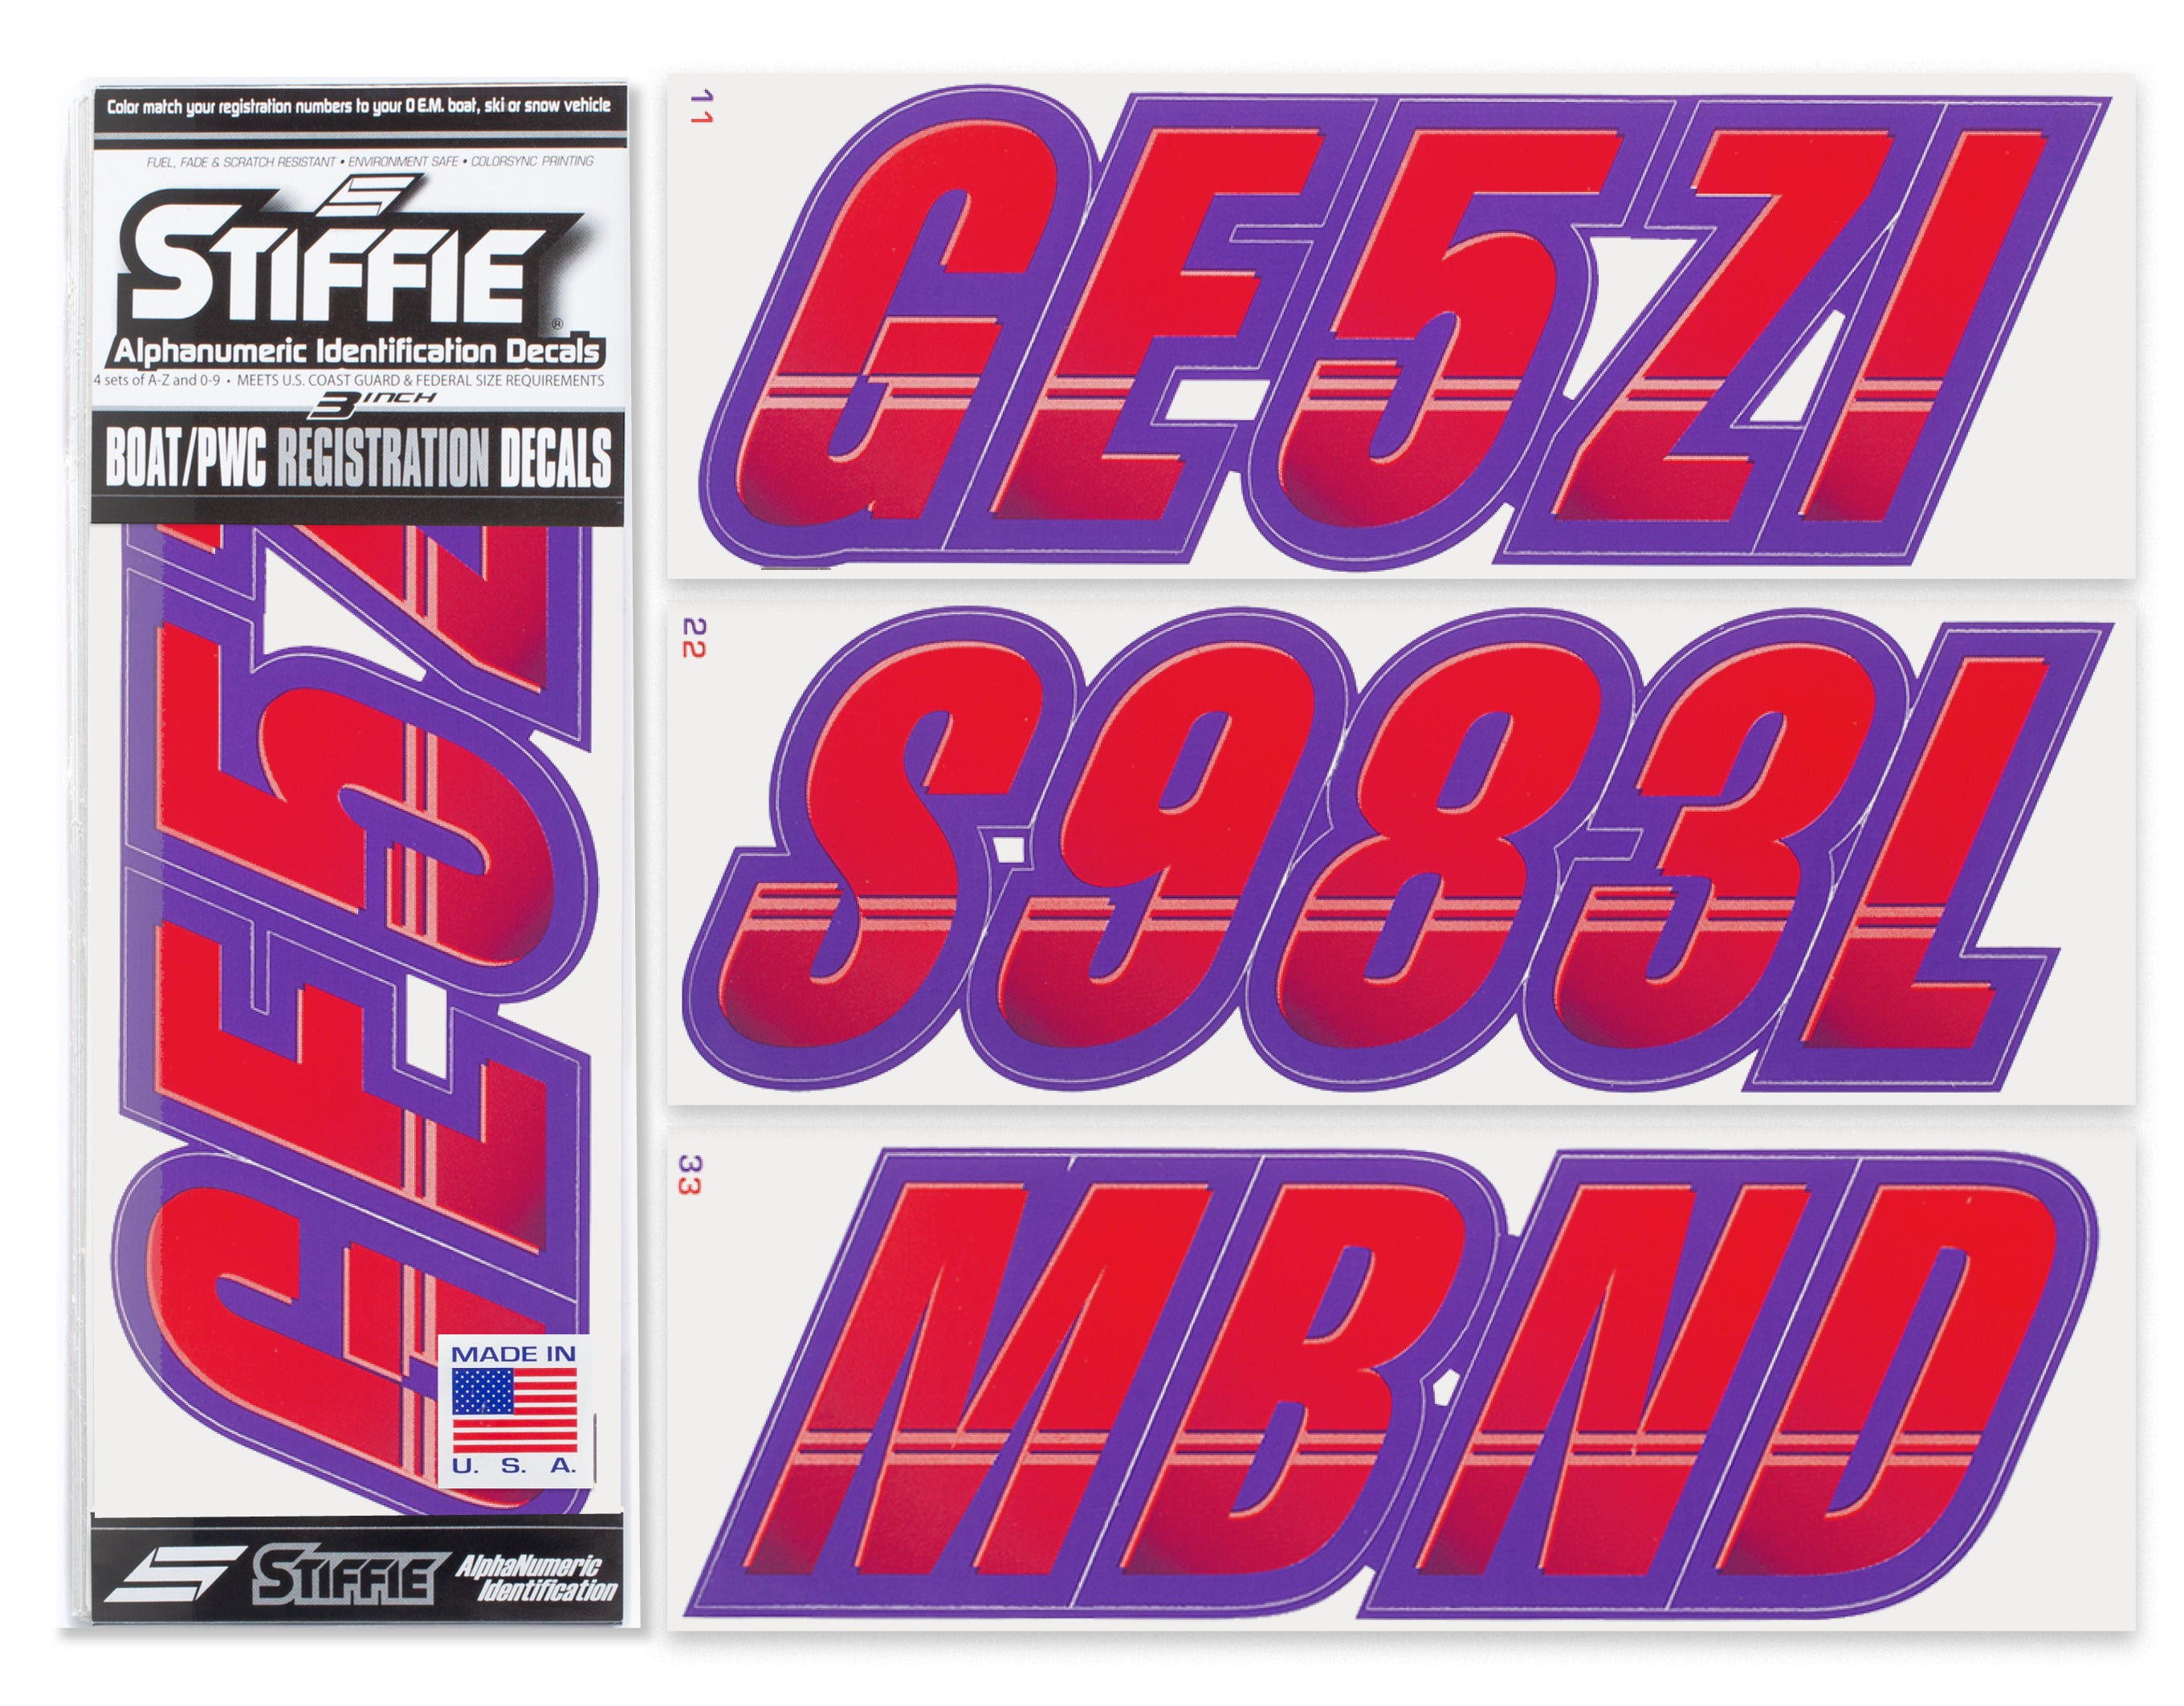 STIFFIE Techtron Red/Purple 3" Alpha-Numeric Registration Identification Numbers Stickers Decals for Boats & Personal Watercraft